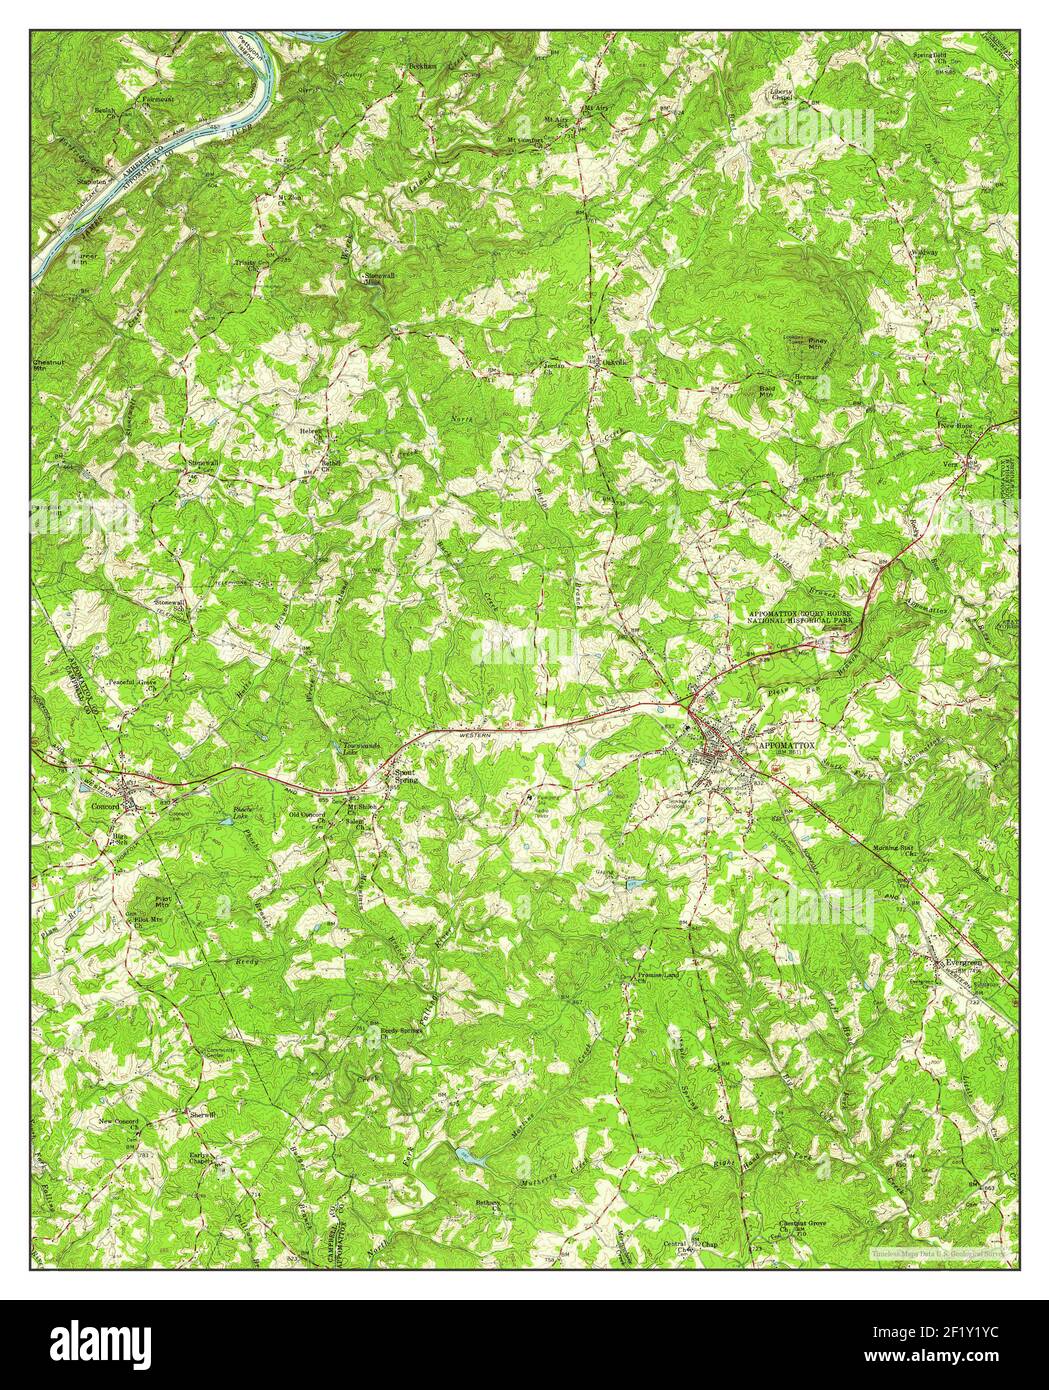 Appomattox, Virginia, map 1958, 1:62500, United States of America by Timeless Maps, data U.S. Geological Survey Stock Photo